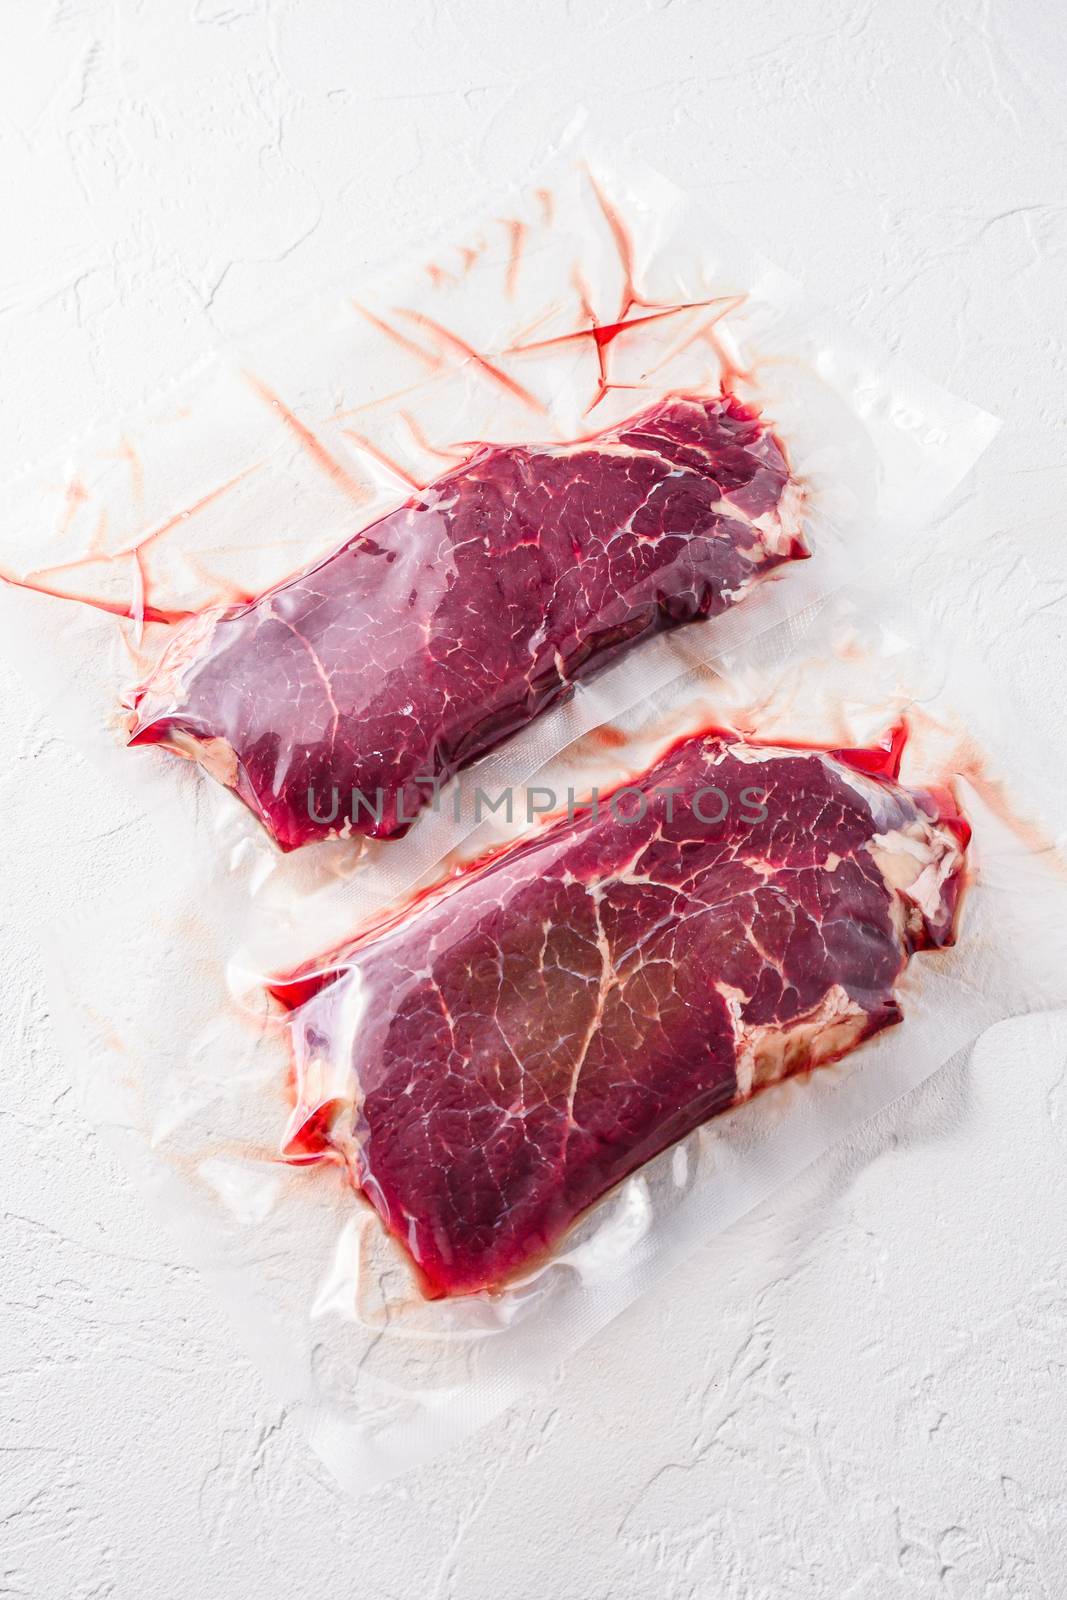 Set of vacuum packed organic beef meat rump steak on white concrete textured background, side view. by Ilianesolenyi